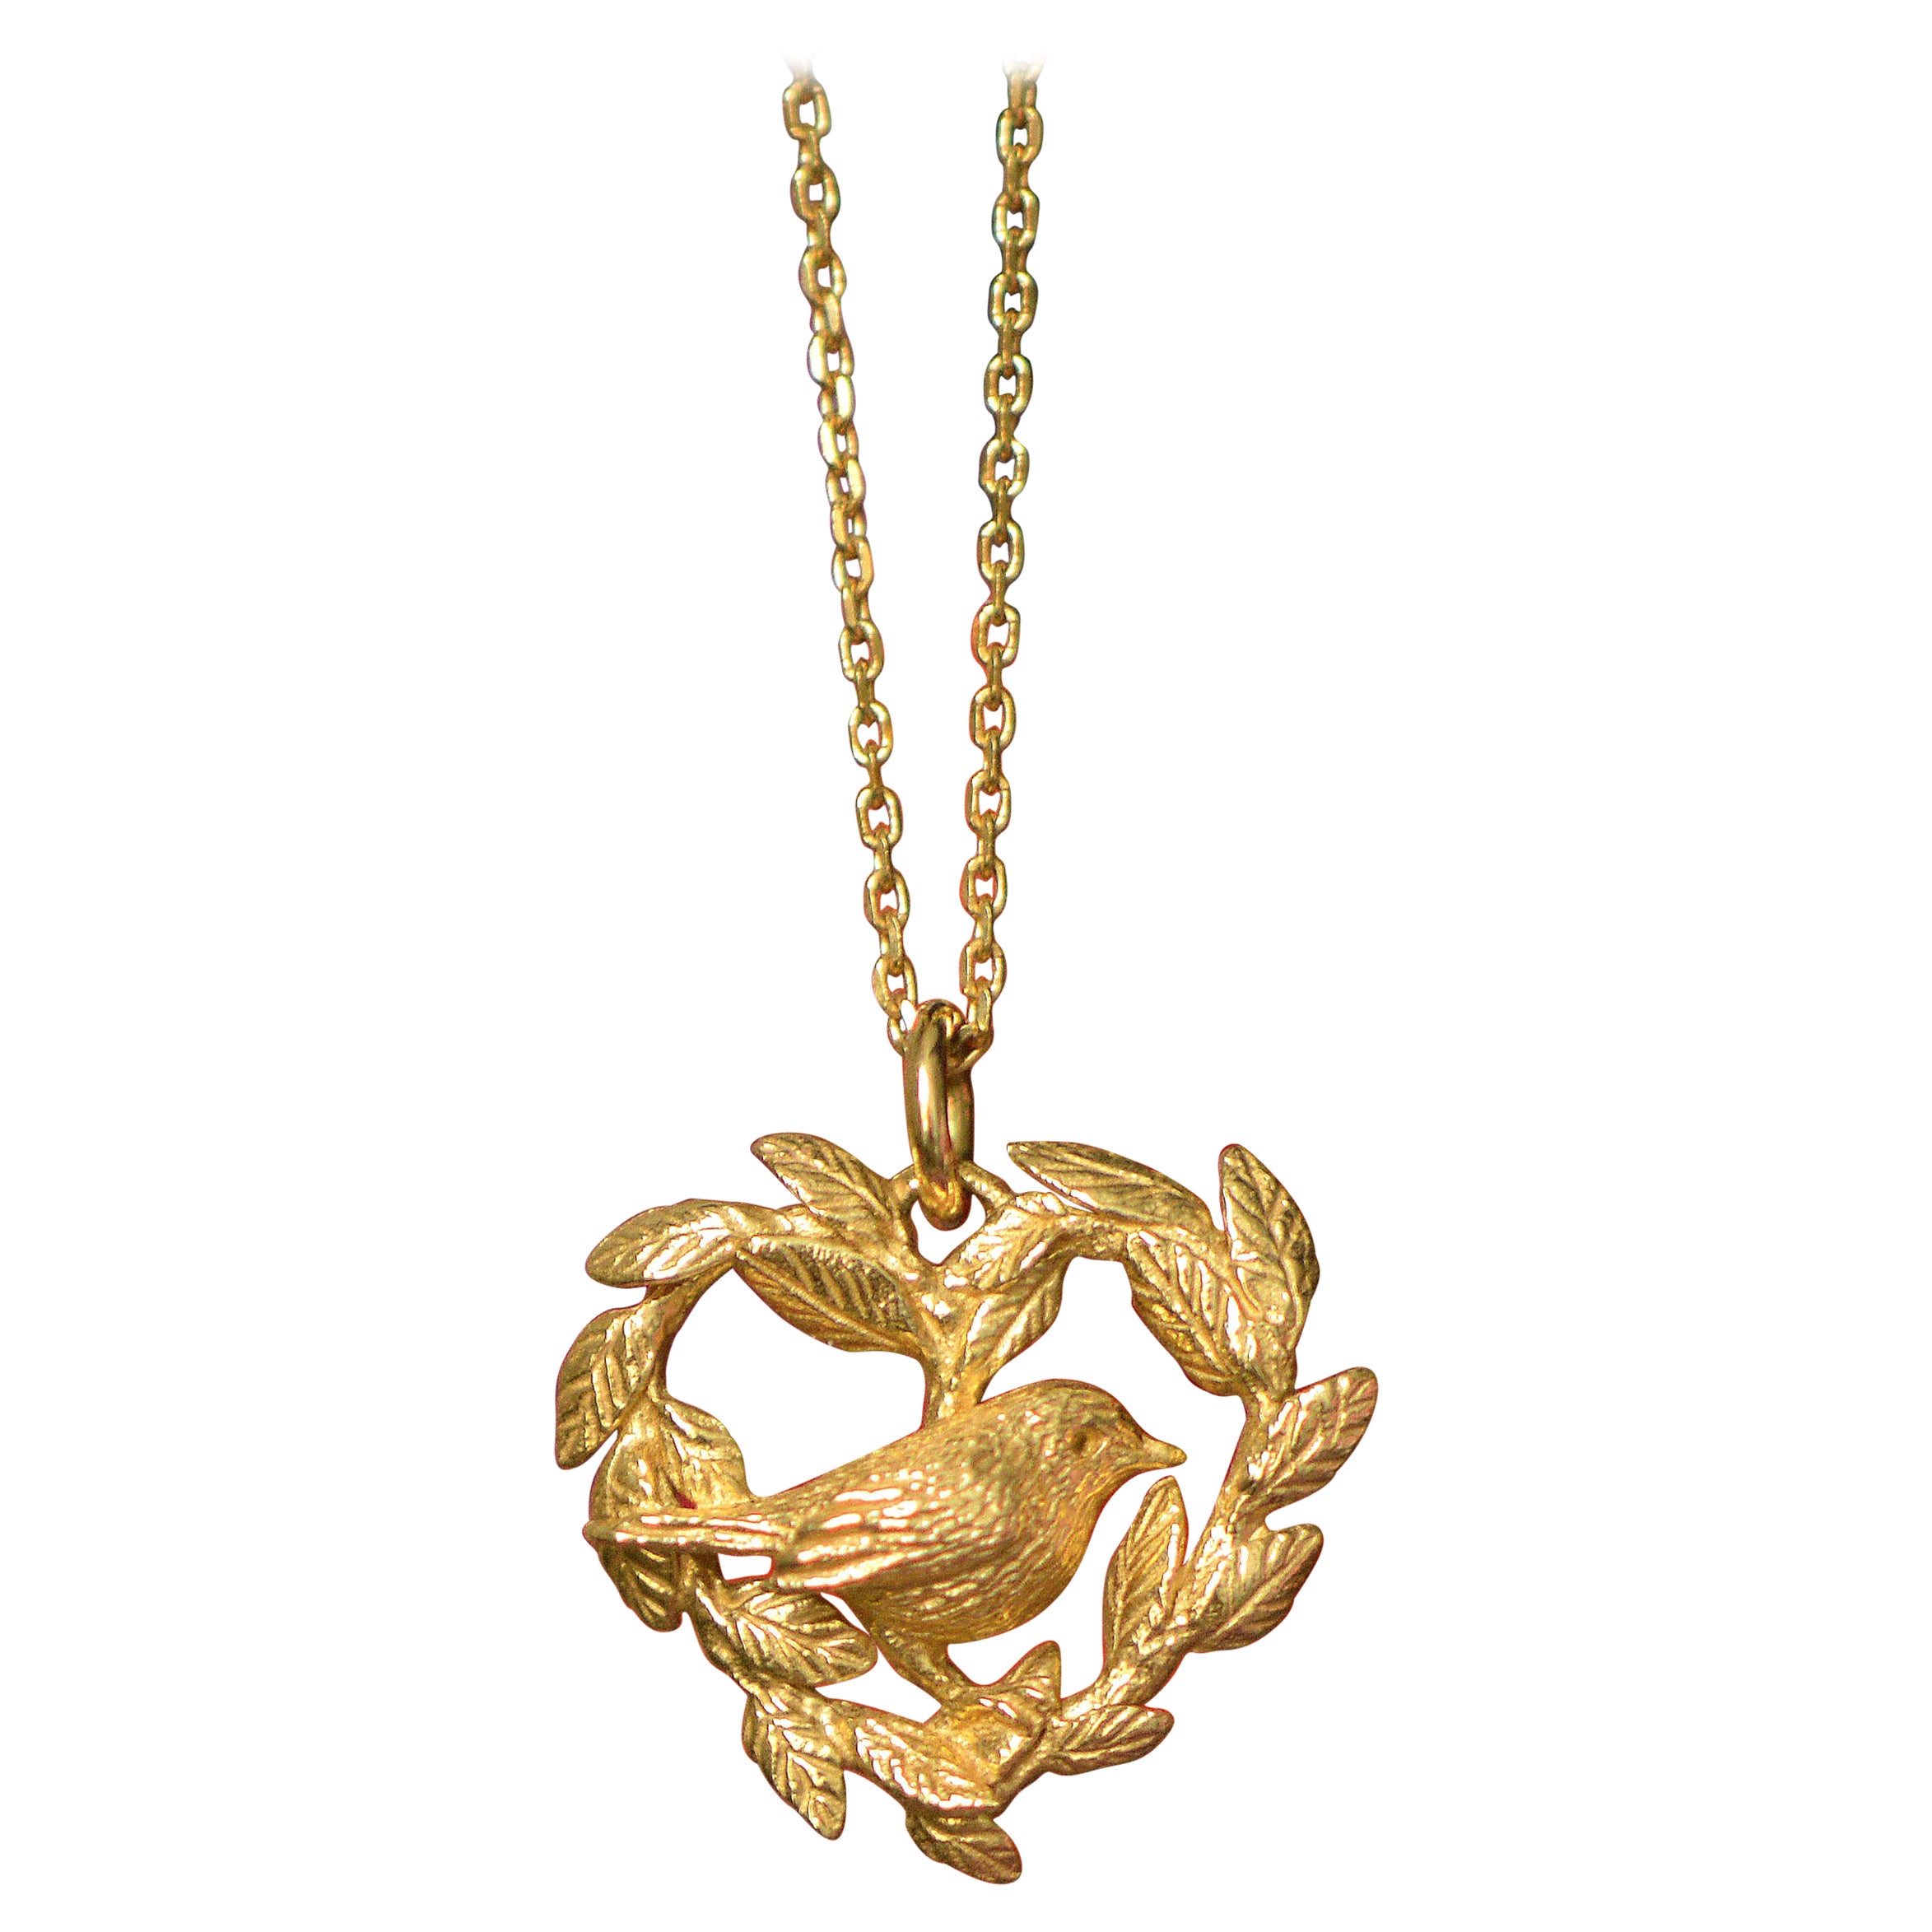 This robin perched on a heart shaped wreath pendant is cast in solid 18 Carat gold and finished by hand, and is created from Lucy's original hand-sculpted design. 

This robin pendant is made in London, United Kingdom using recycled or Fairtrade